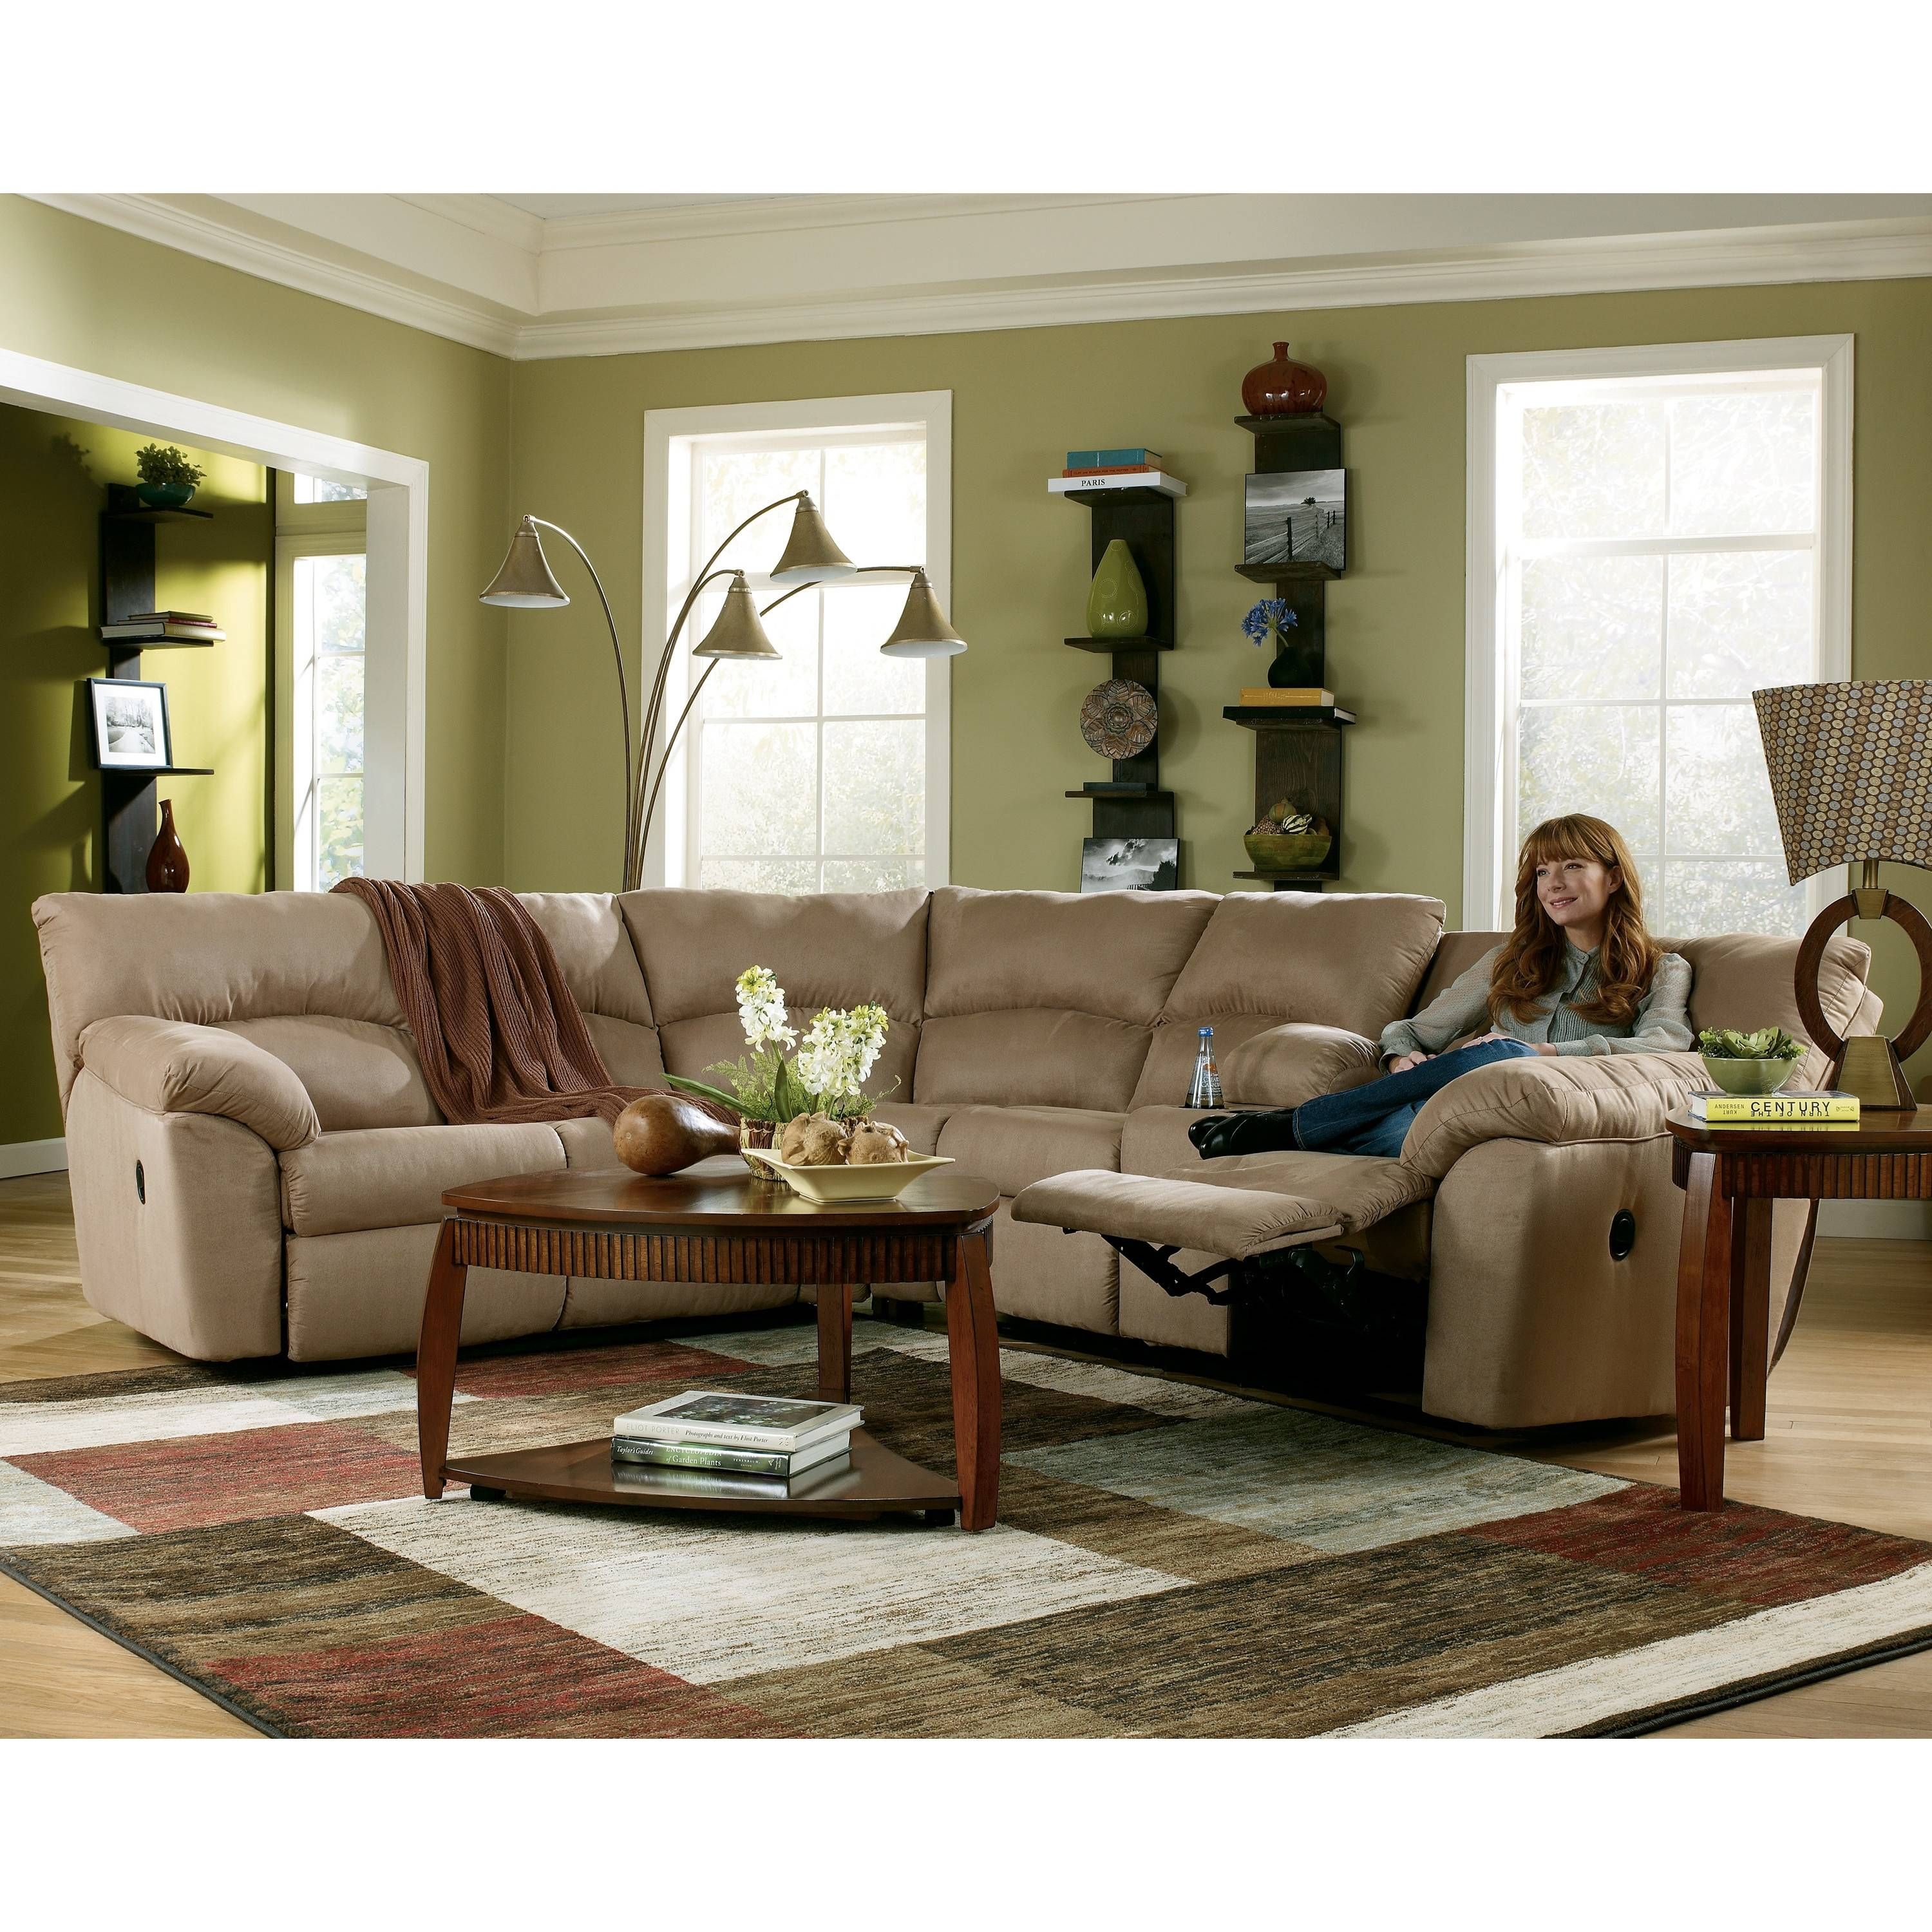 Furniture: L Shaped Grey Sectional Sofa With Round Coffee Table Inside Coffee Table For Sectional Sofa (View 22 of 30)